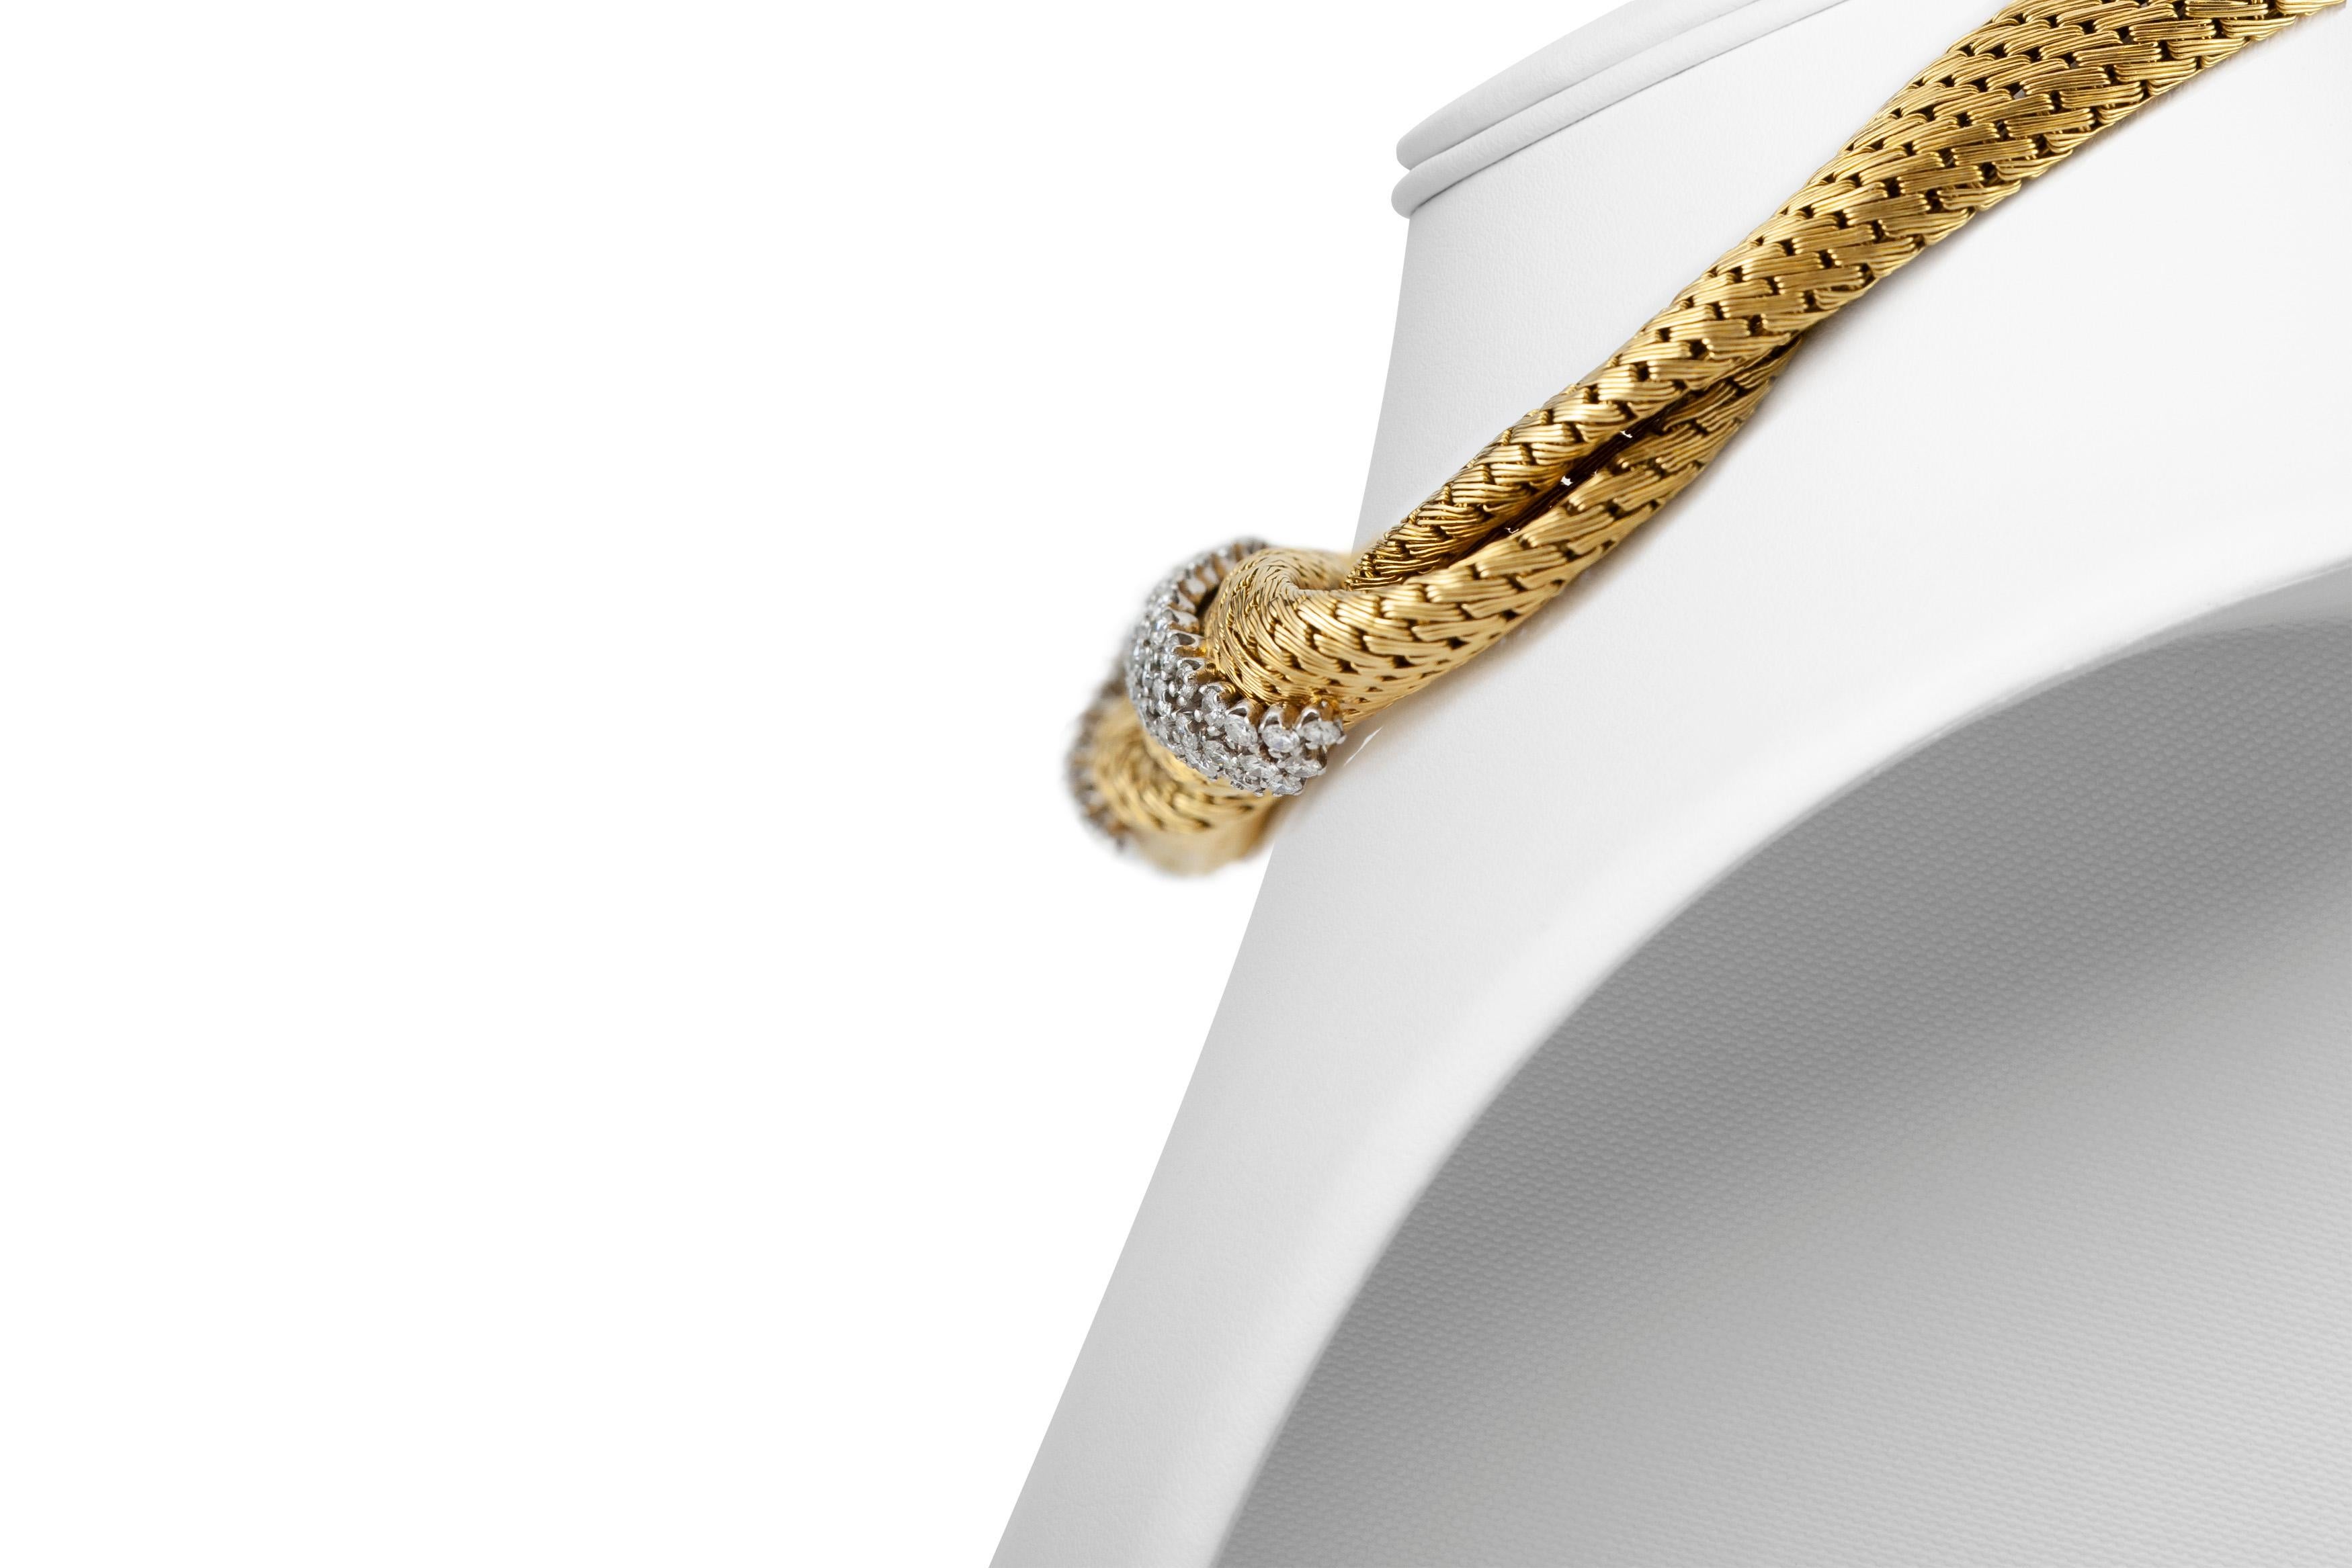 The necklace is finely crafted in 18k yellow gold with diamonds weighing approximately total of 4.50 carat.